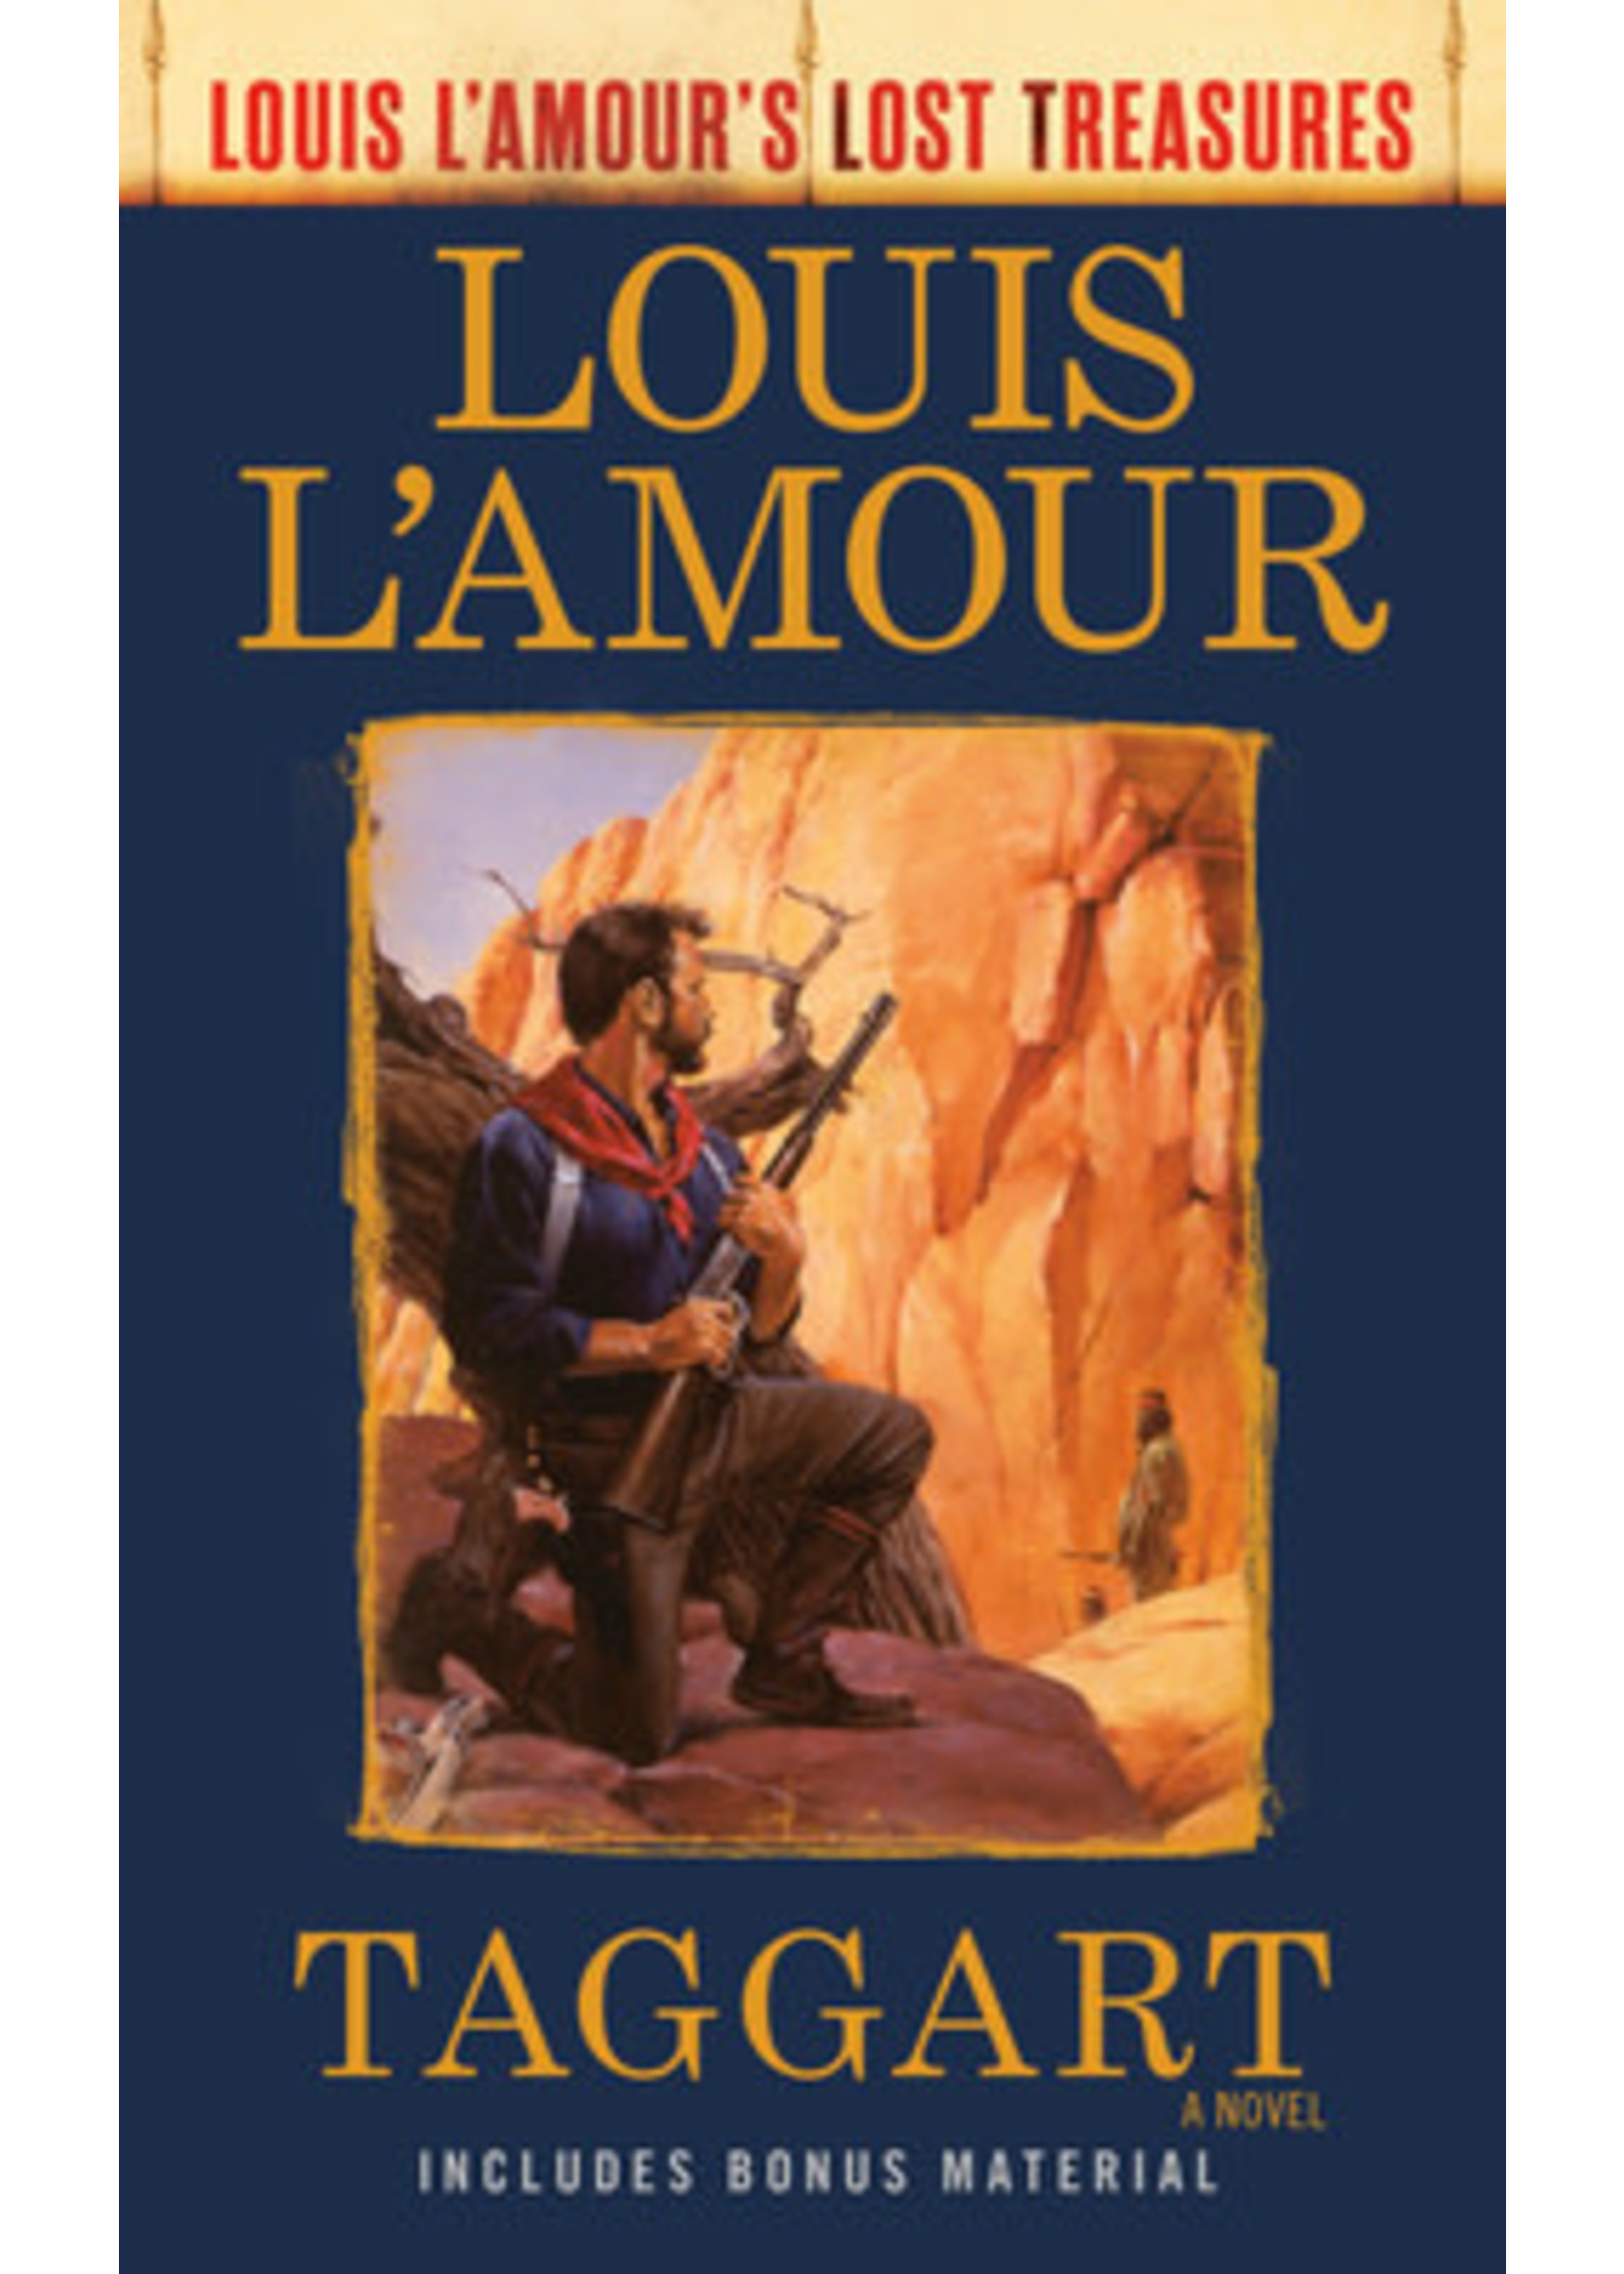 Taggart by Louis L'Amour